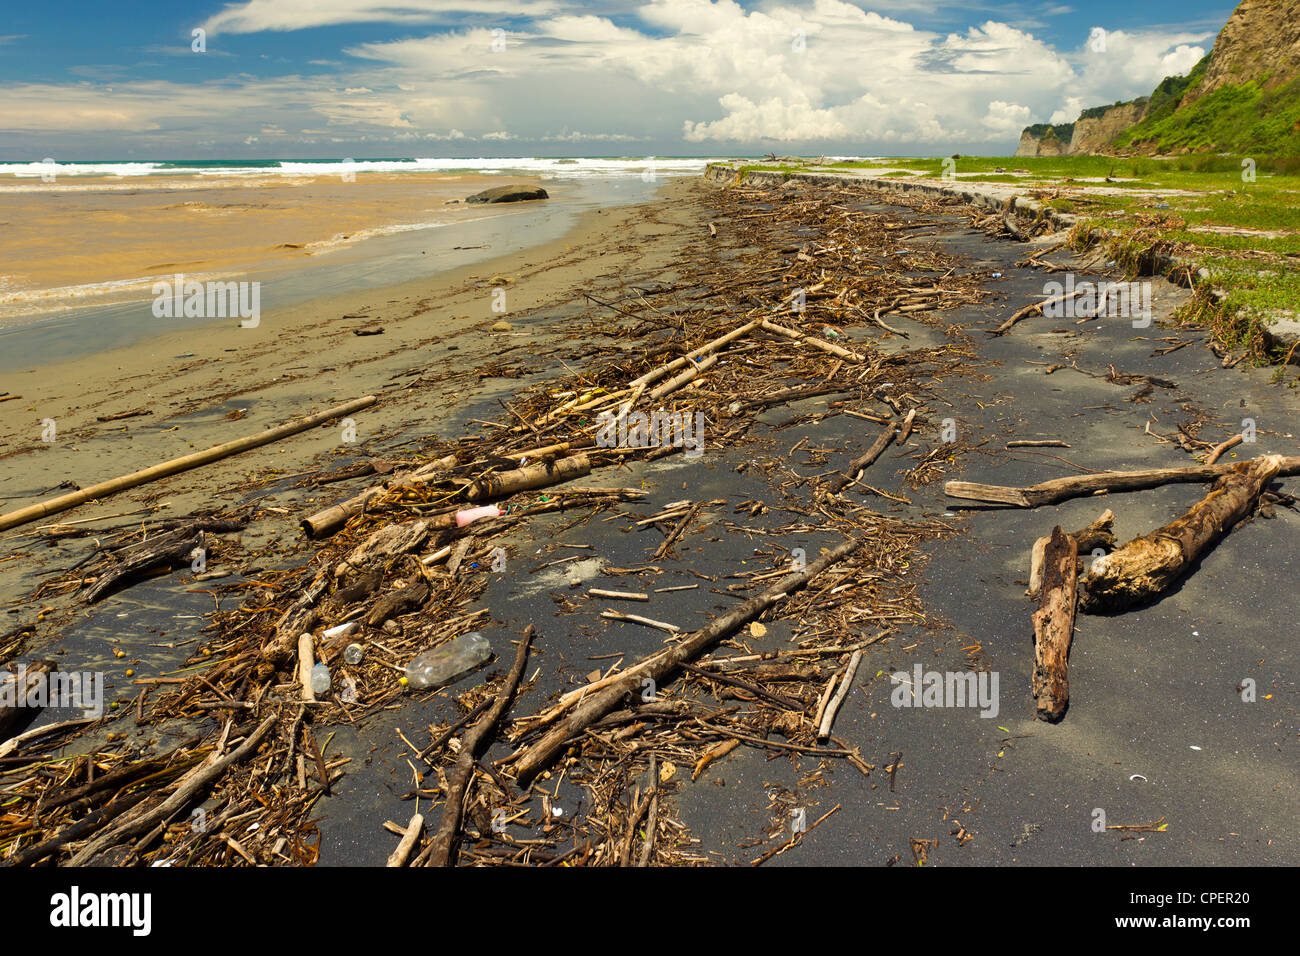 Driftwood and plastic waste on a tropical beach on the Pacific coast of Ecuador Stock Photo